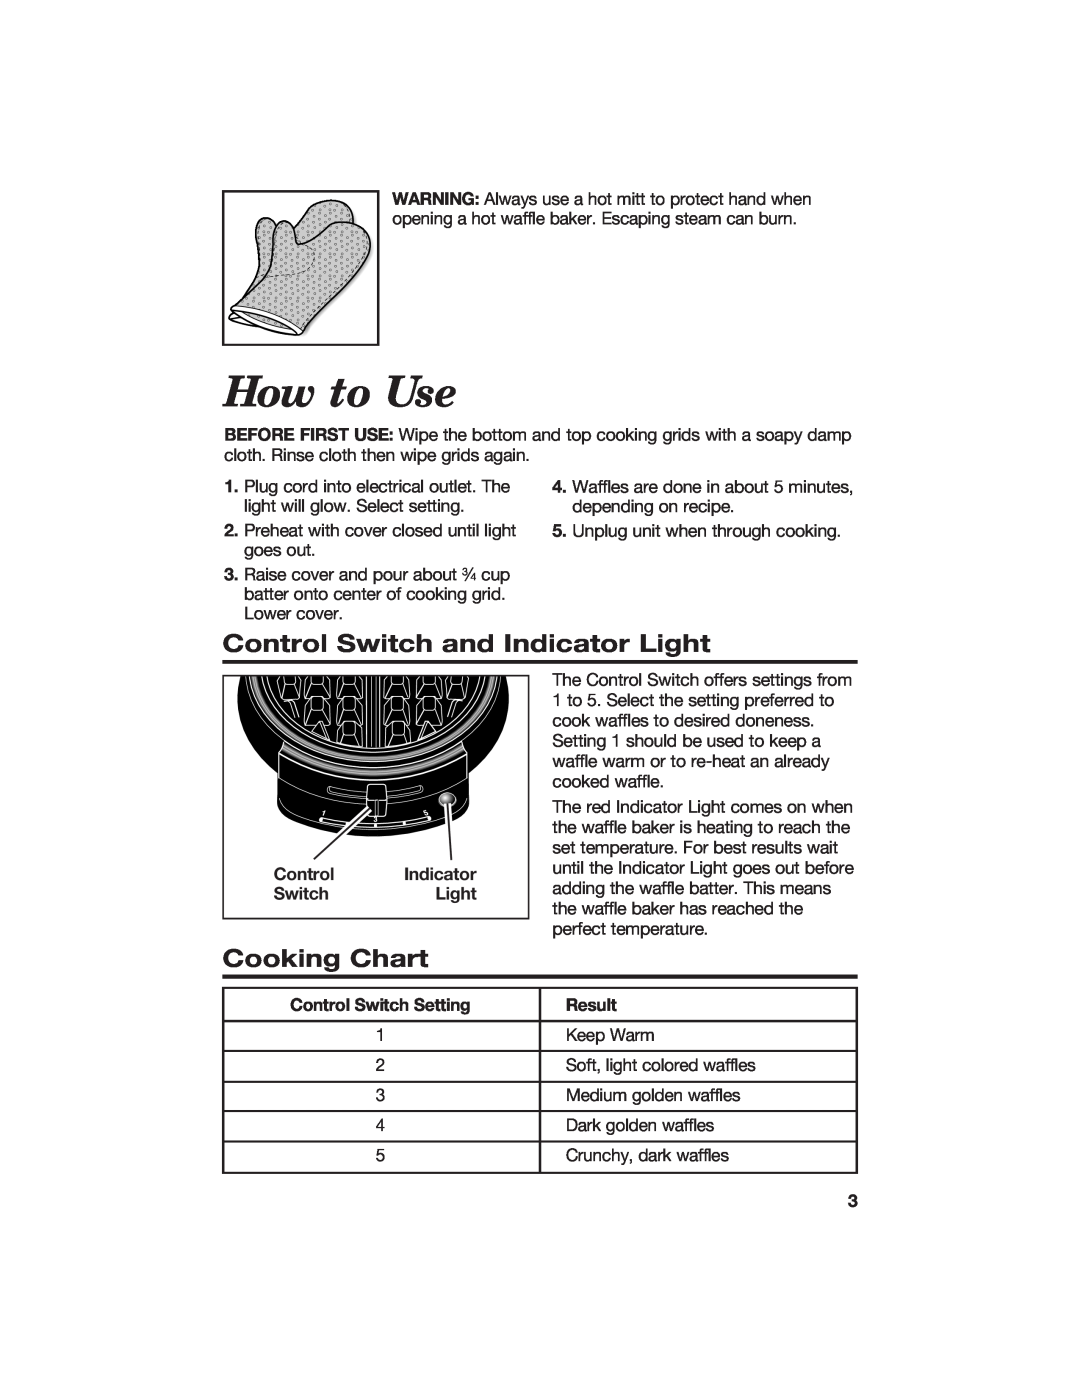 Hamilton Beach 840056800 How to Use, Control Switch and Indicator Light, Cooking Chart, Control Indicator SwitchLight 